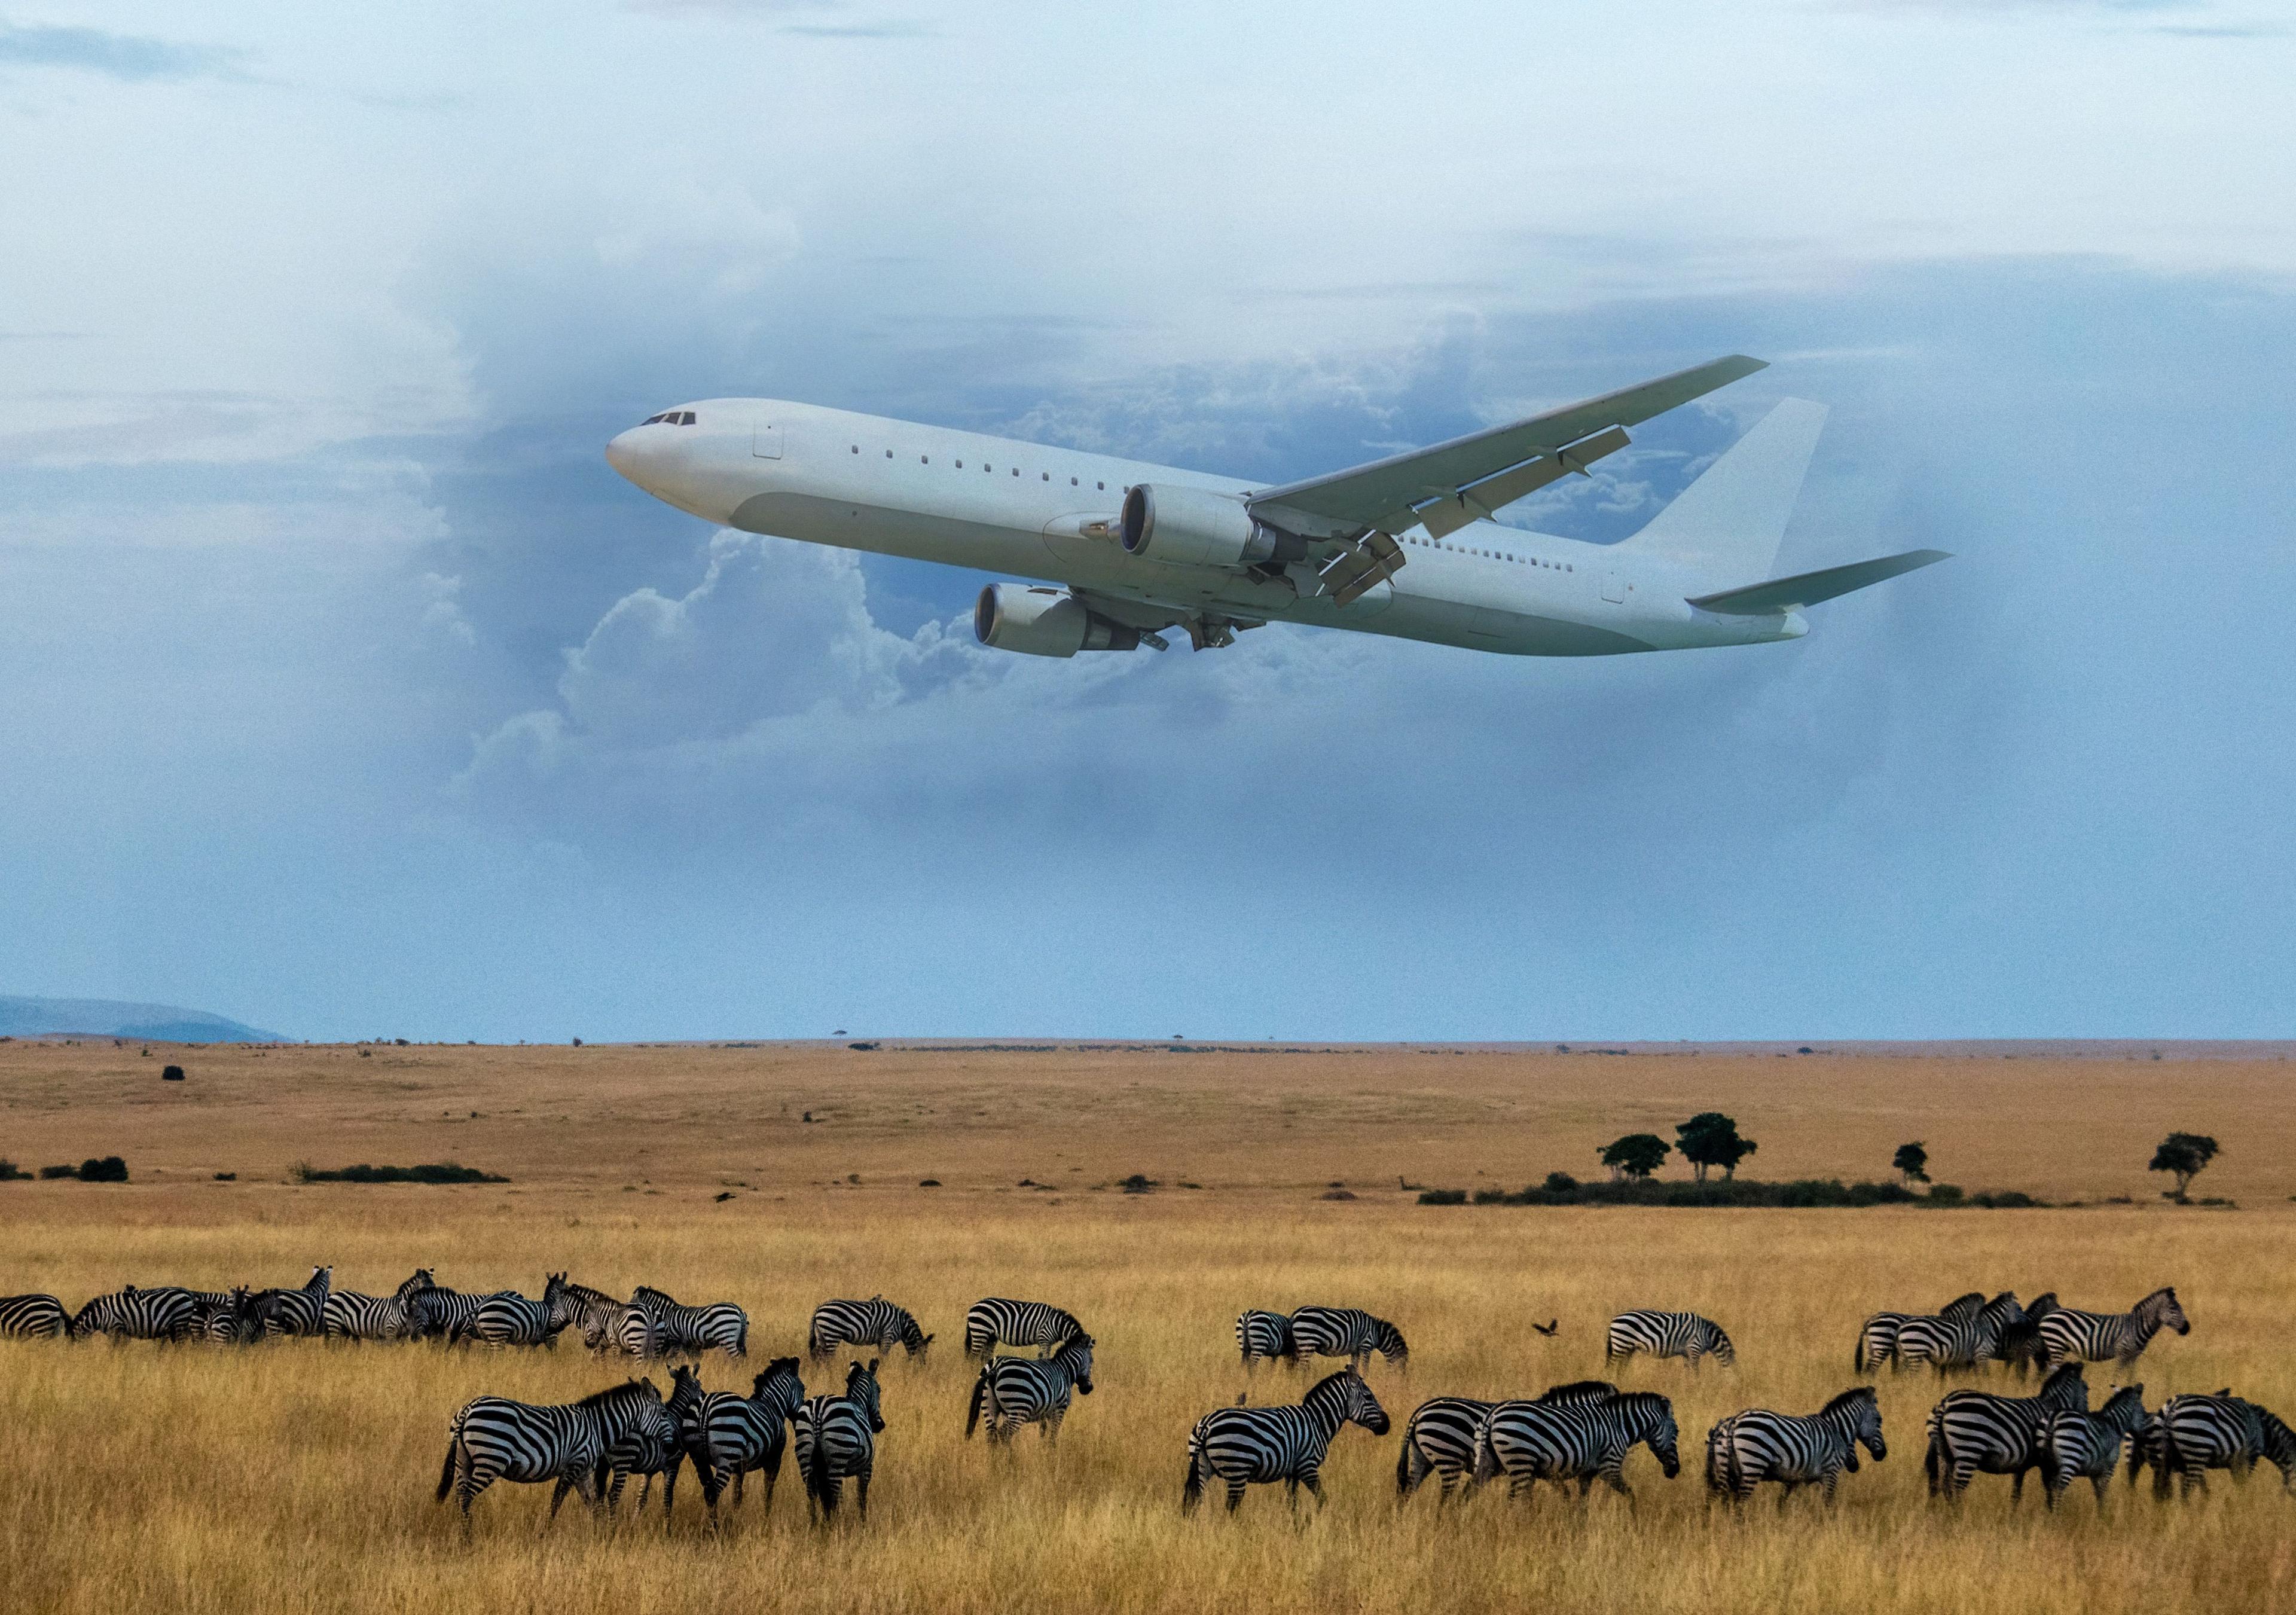 Cleaner air travel in Africa: Will a post-pandemic recovery herald greener skies for Africa's fleet?